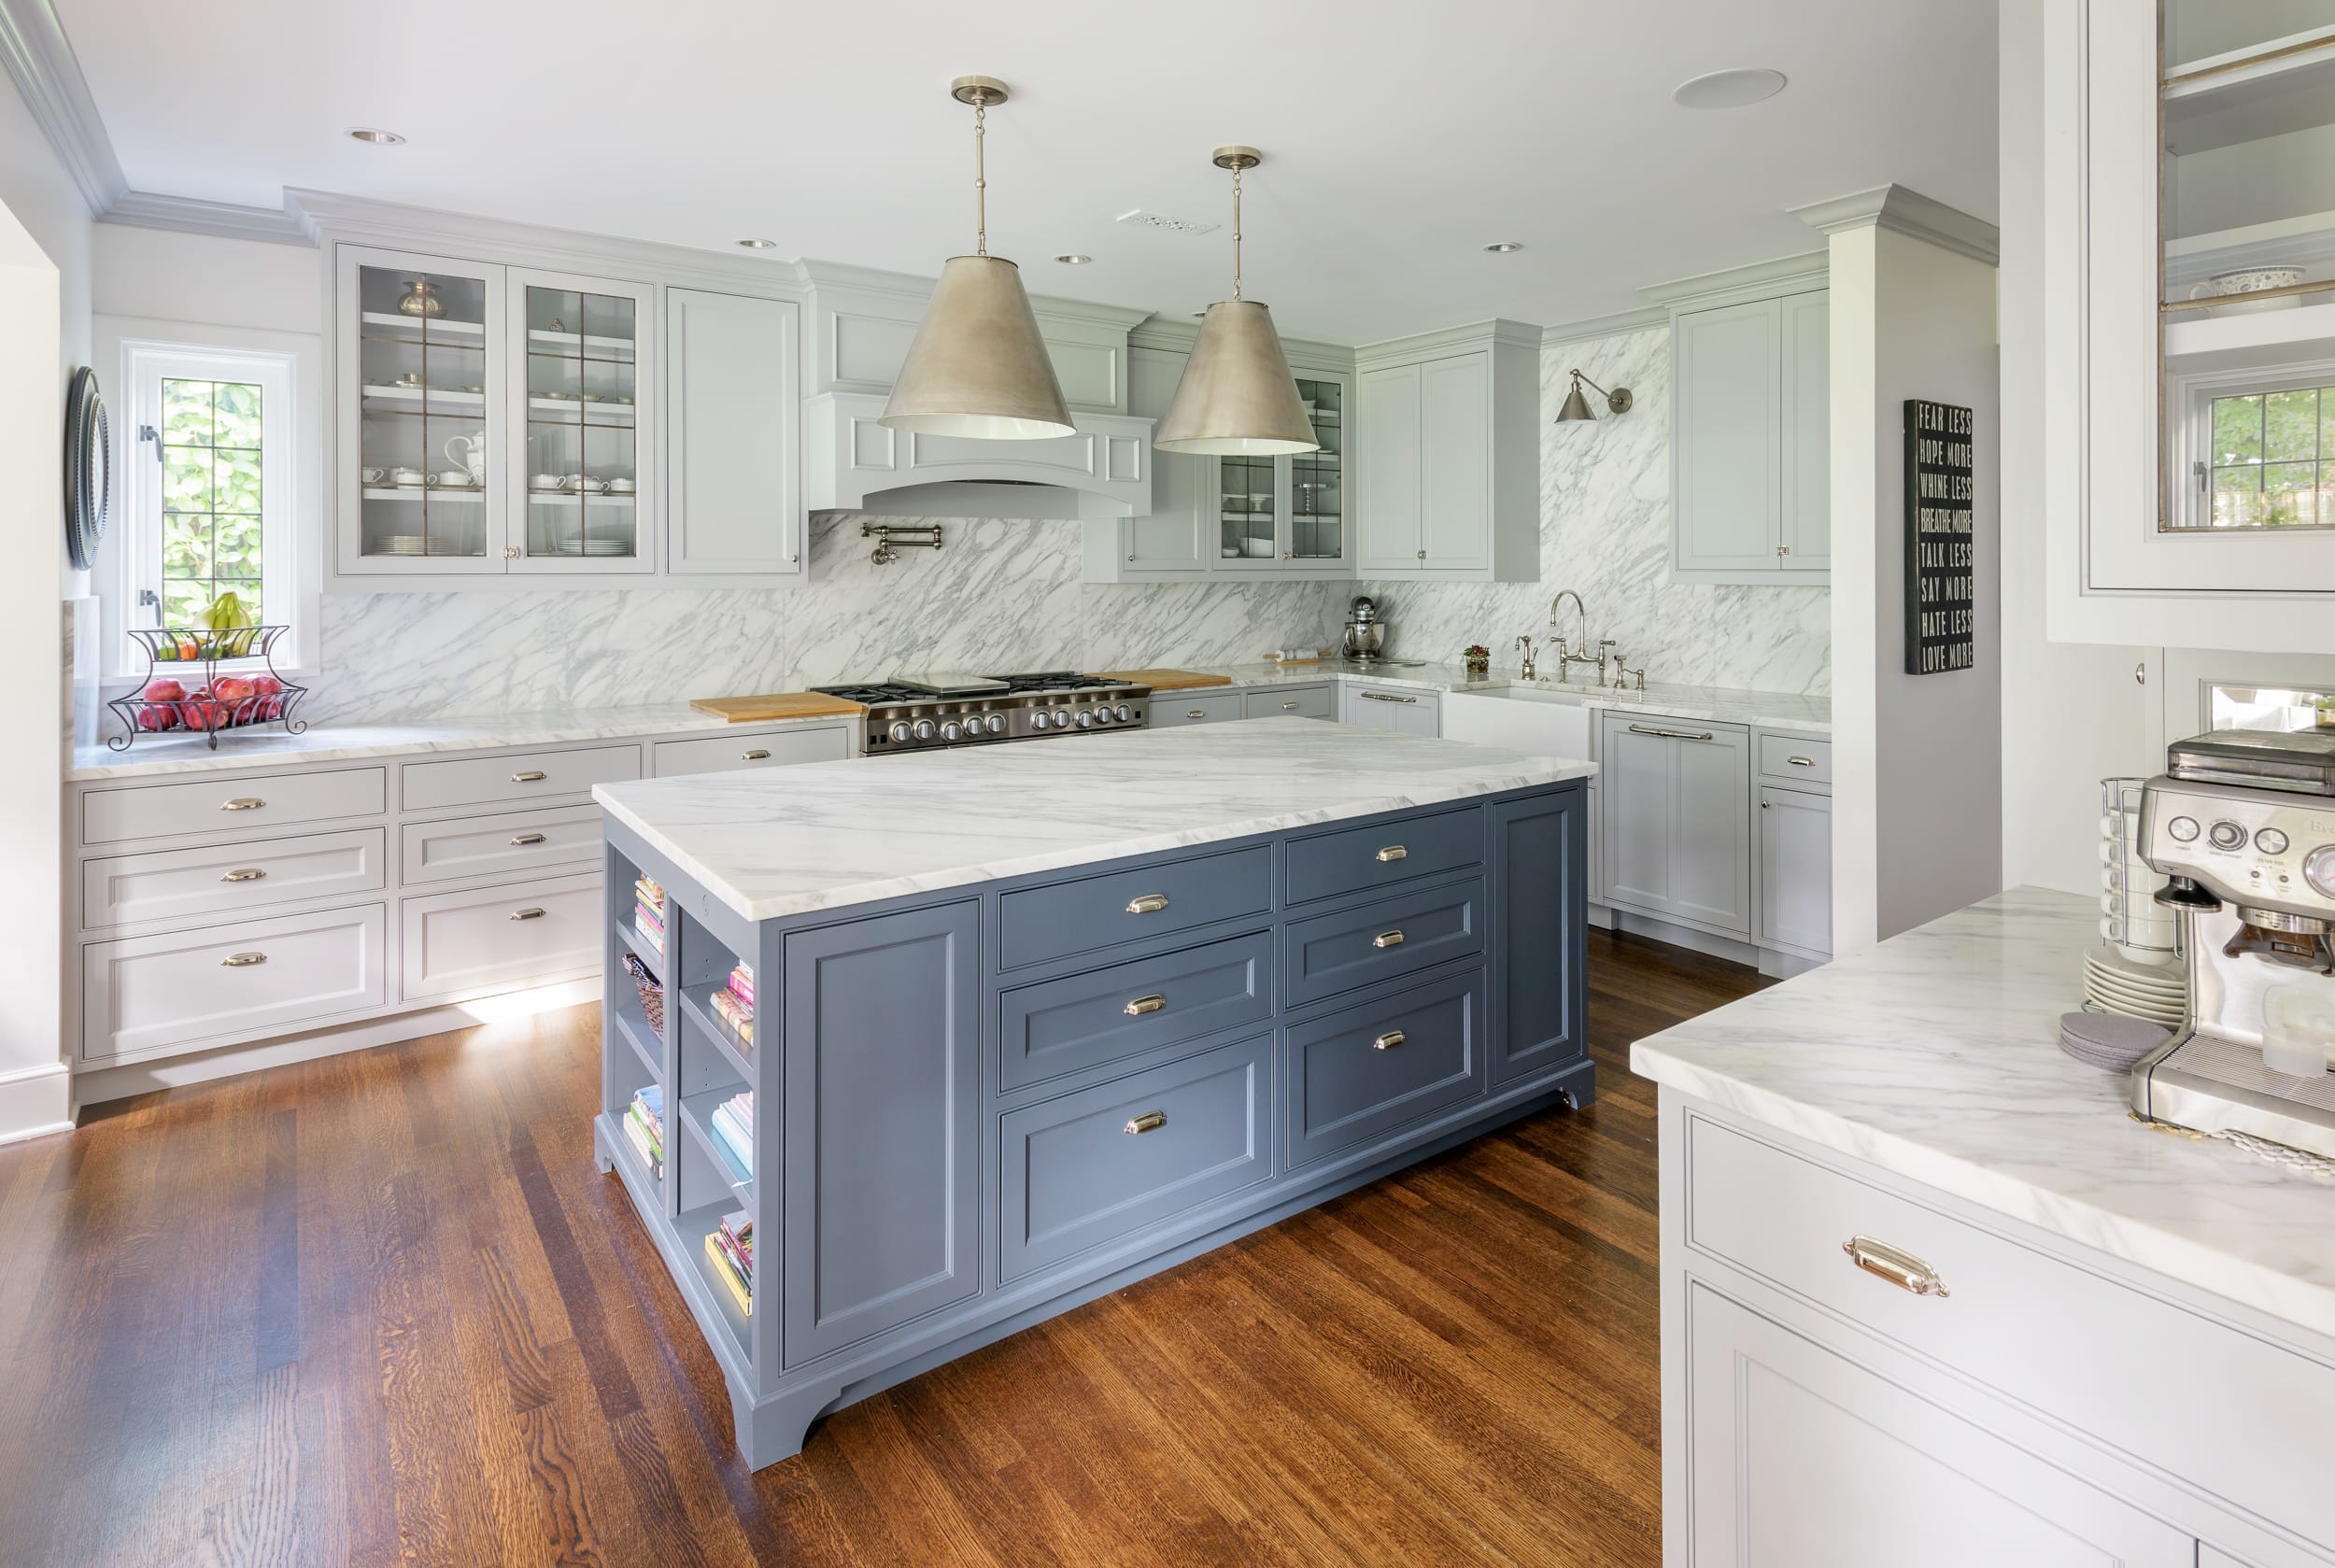 A kitchen with marble counter tops and cabinets.